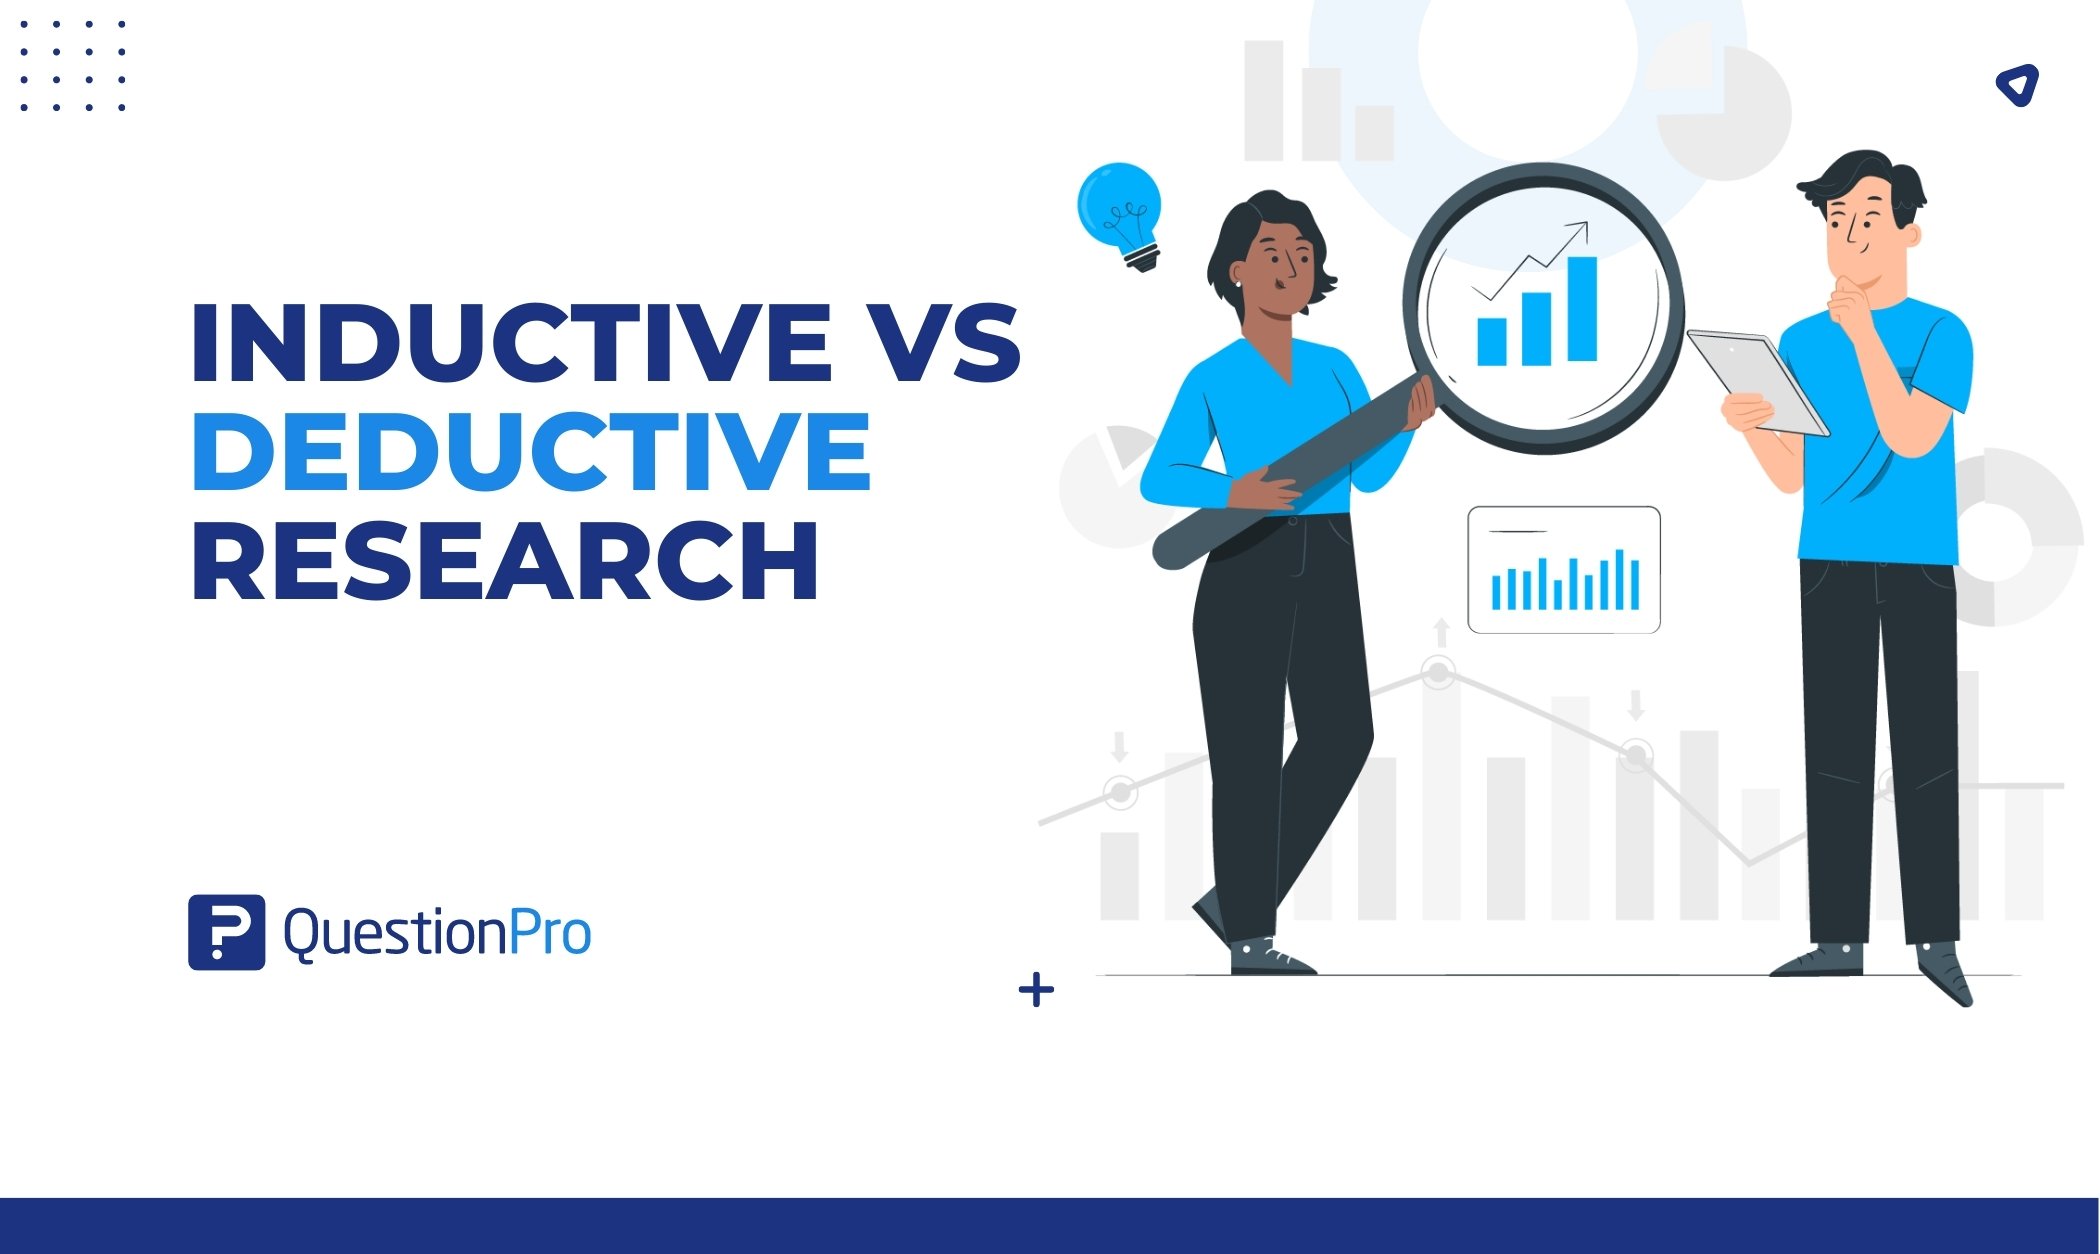 Inductive vs deductive research: Understand the differences between these two approaches to thinking to guide your research. Learn more.